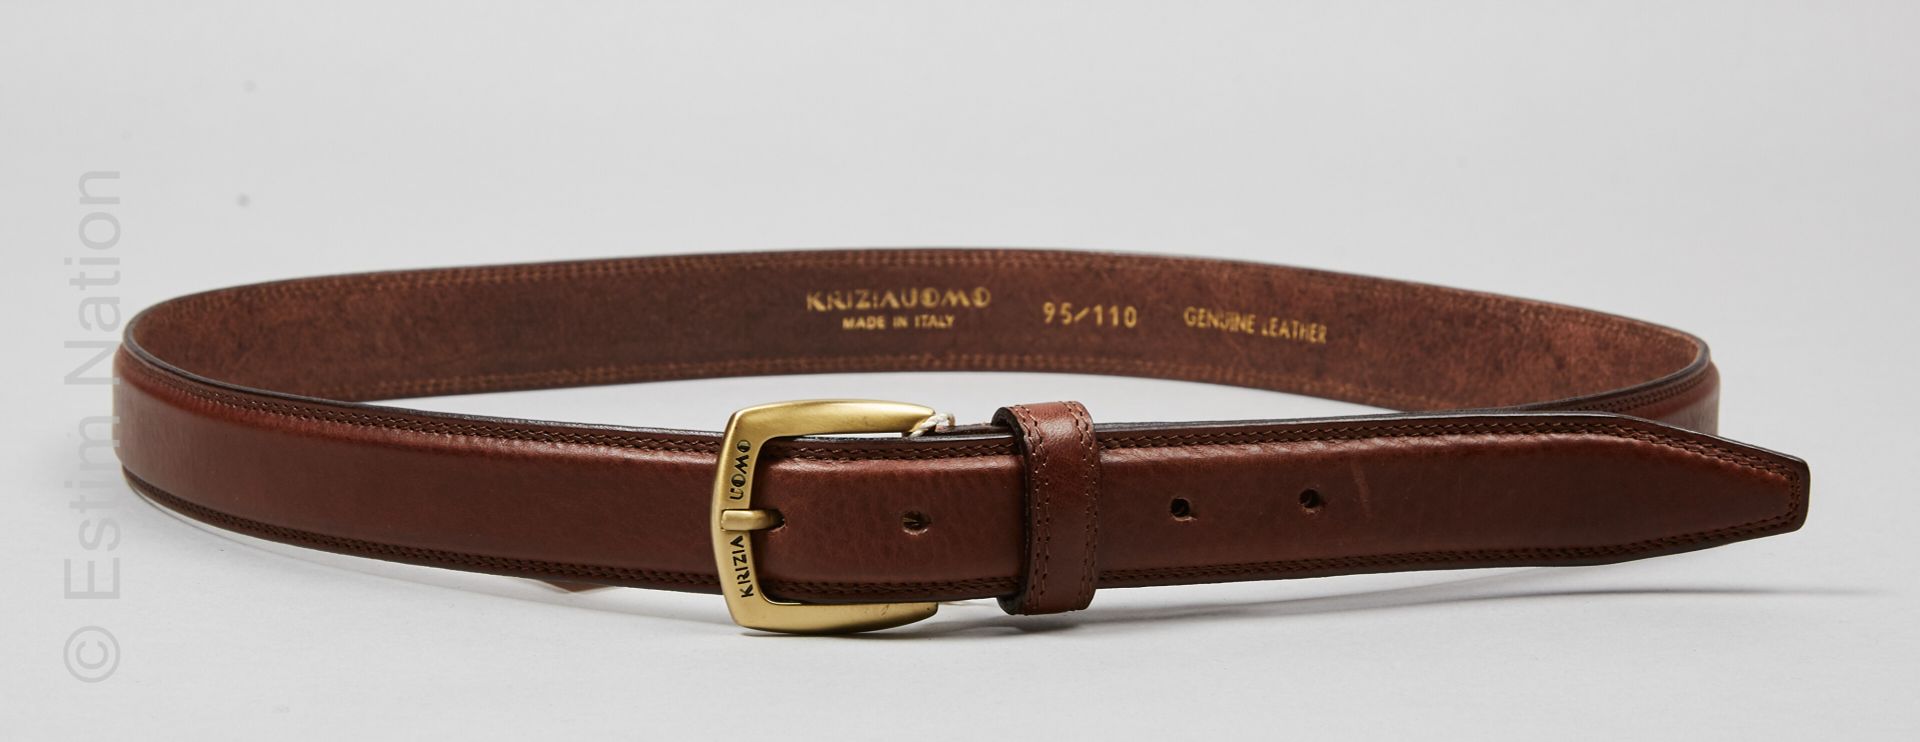 KRIZIA UOMO Belt in chocolate cowhide, buckle with brass patina (T 95/110)